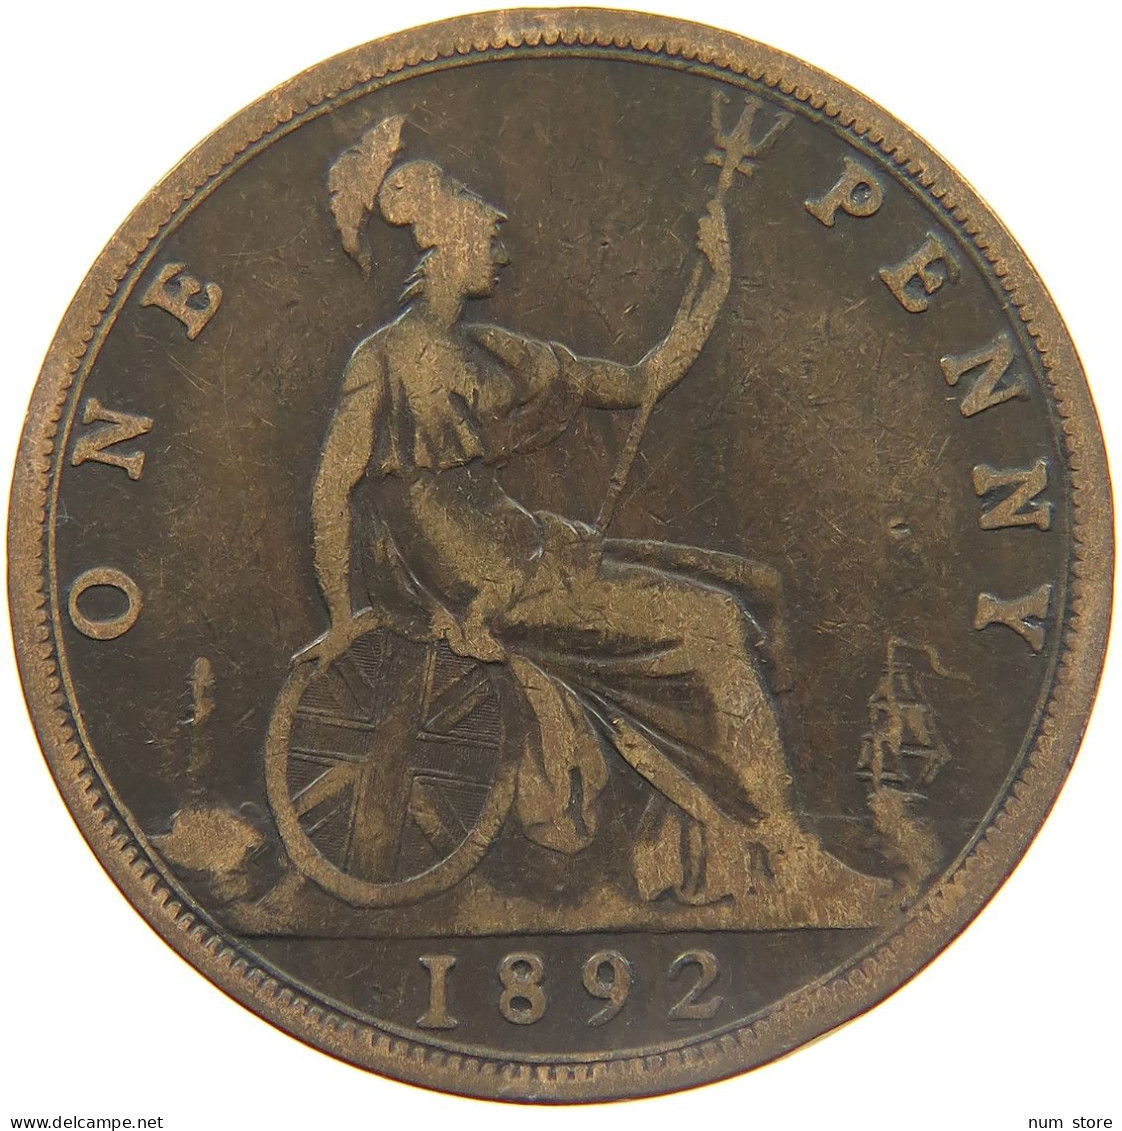 GREAT BRITAIN PENNY 1892 VICTORIA 1837-1901 #MA 023282 - D. 1 Penny